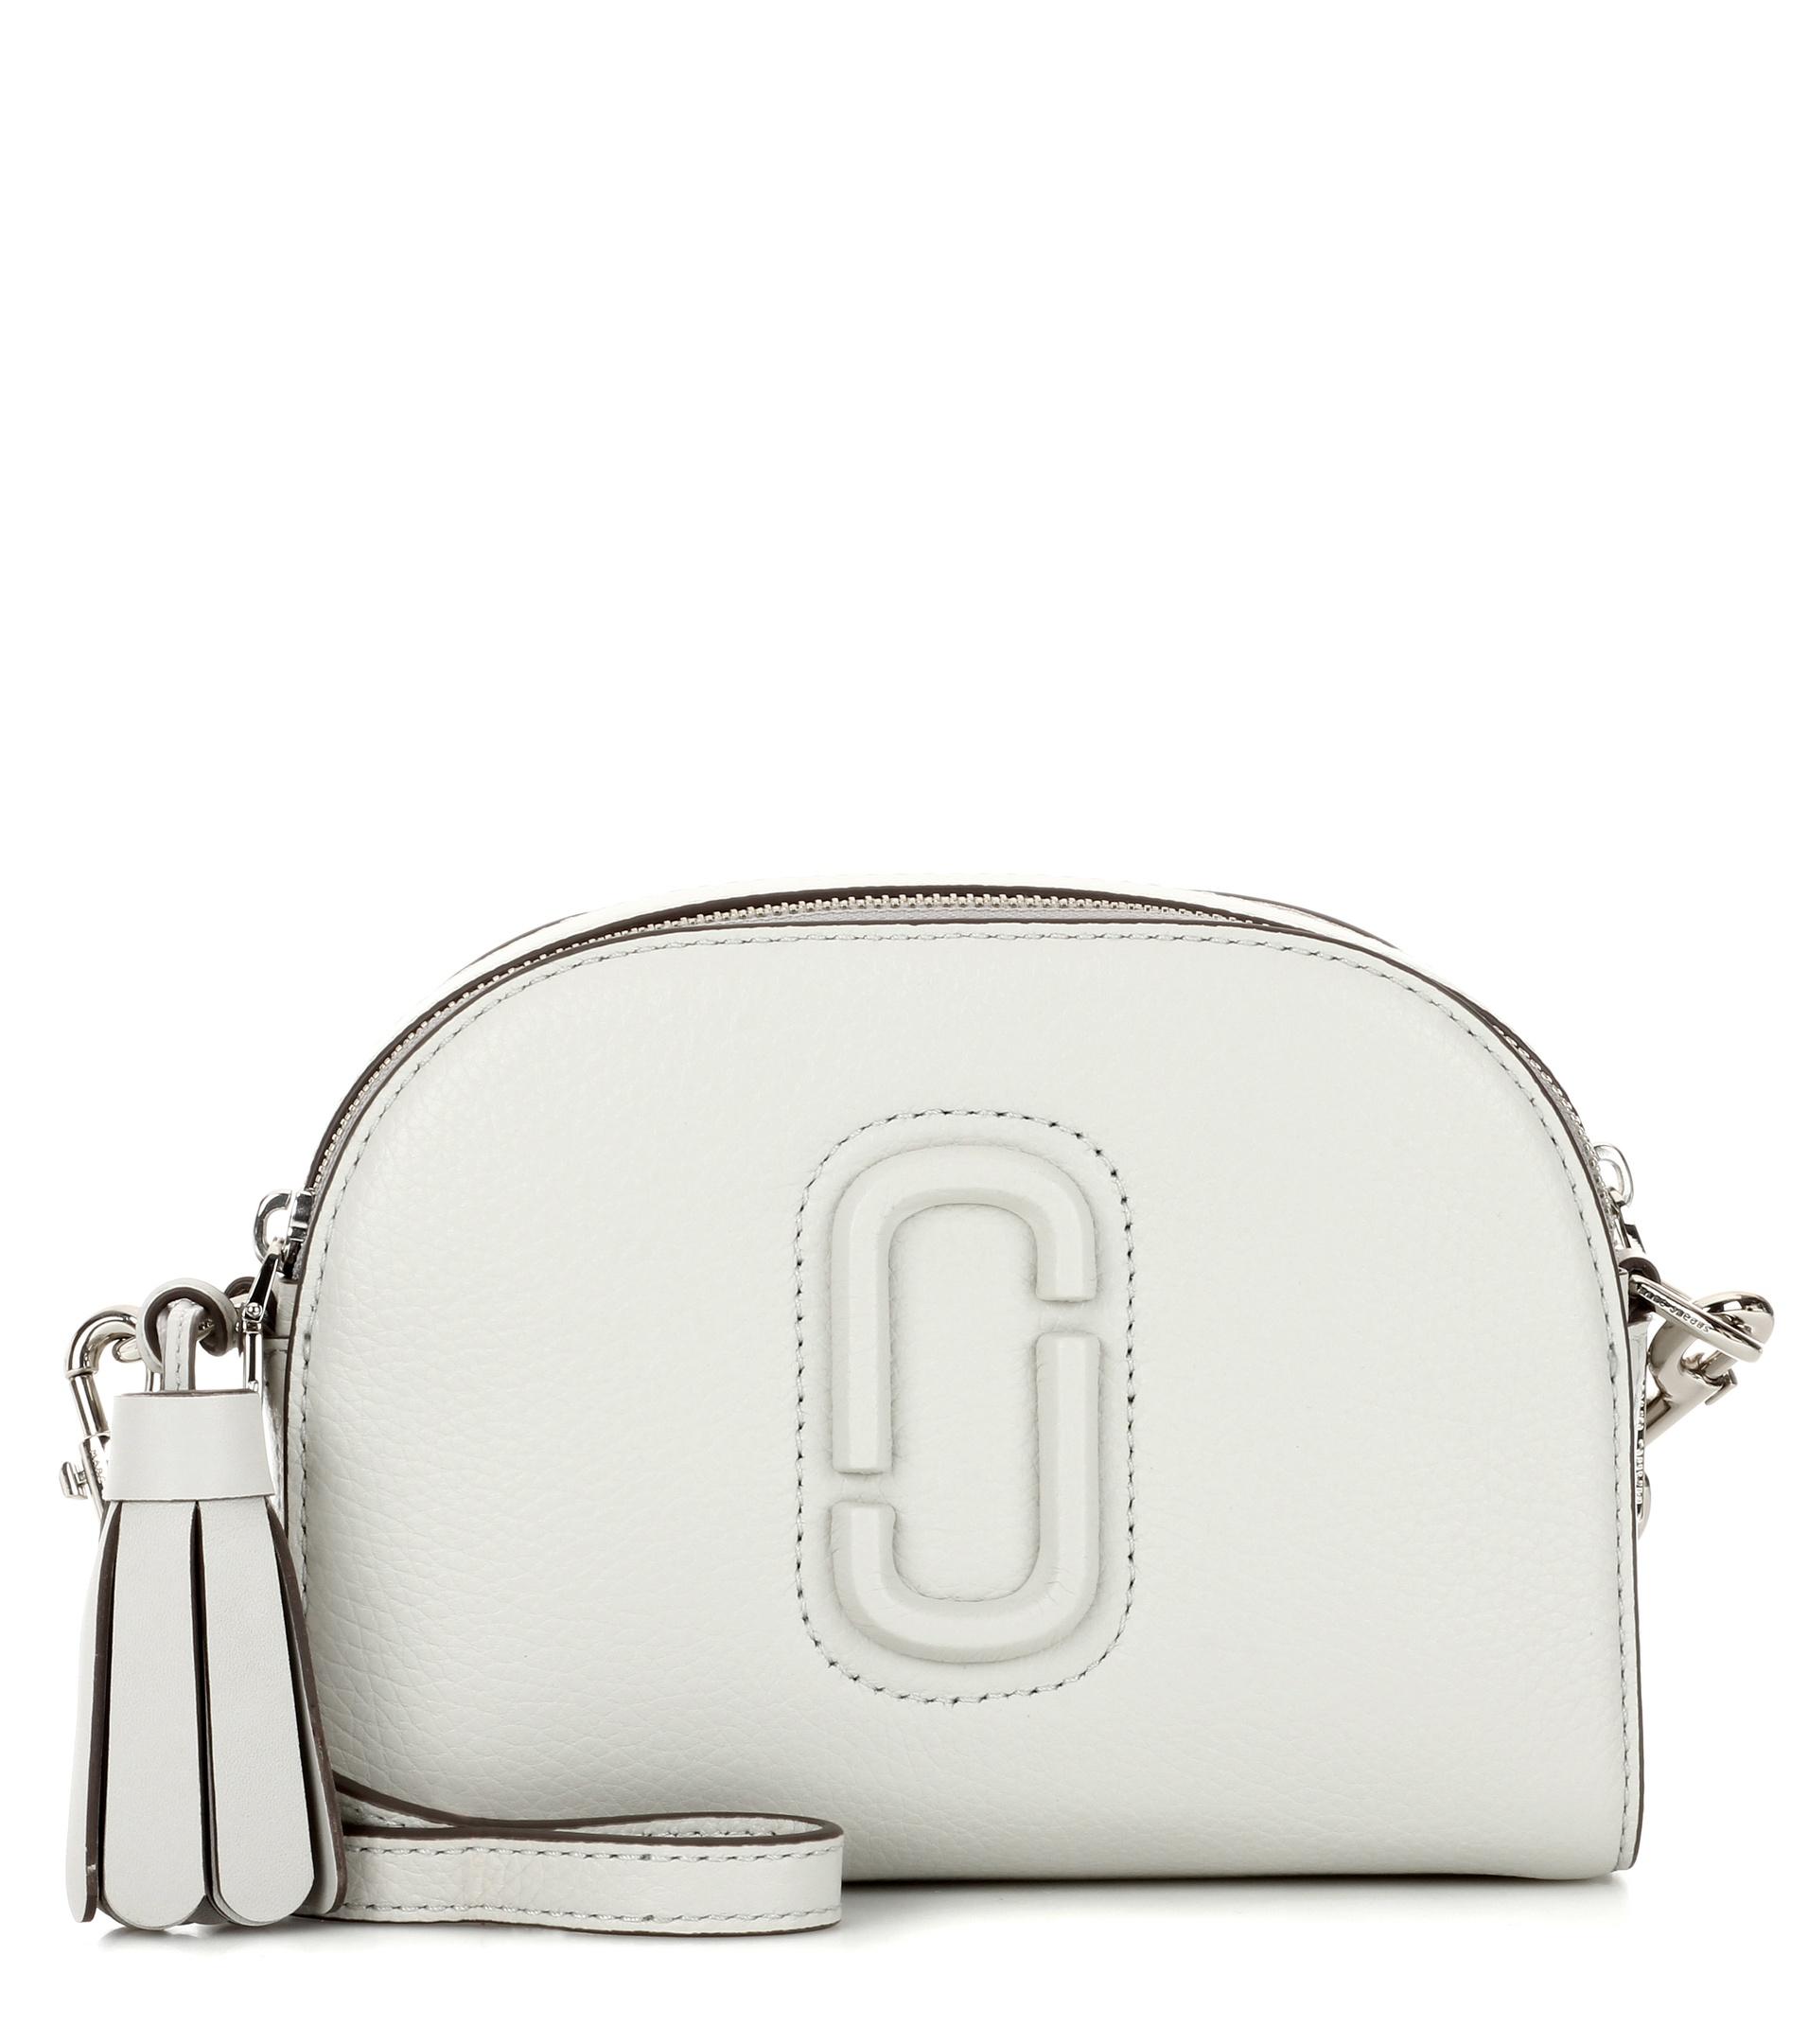 Marc Jacobs Shutter Small Leather Crossbody Bag in White